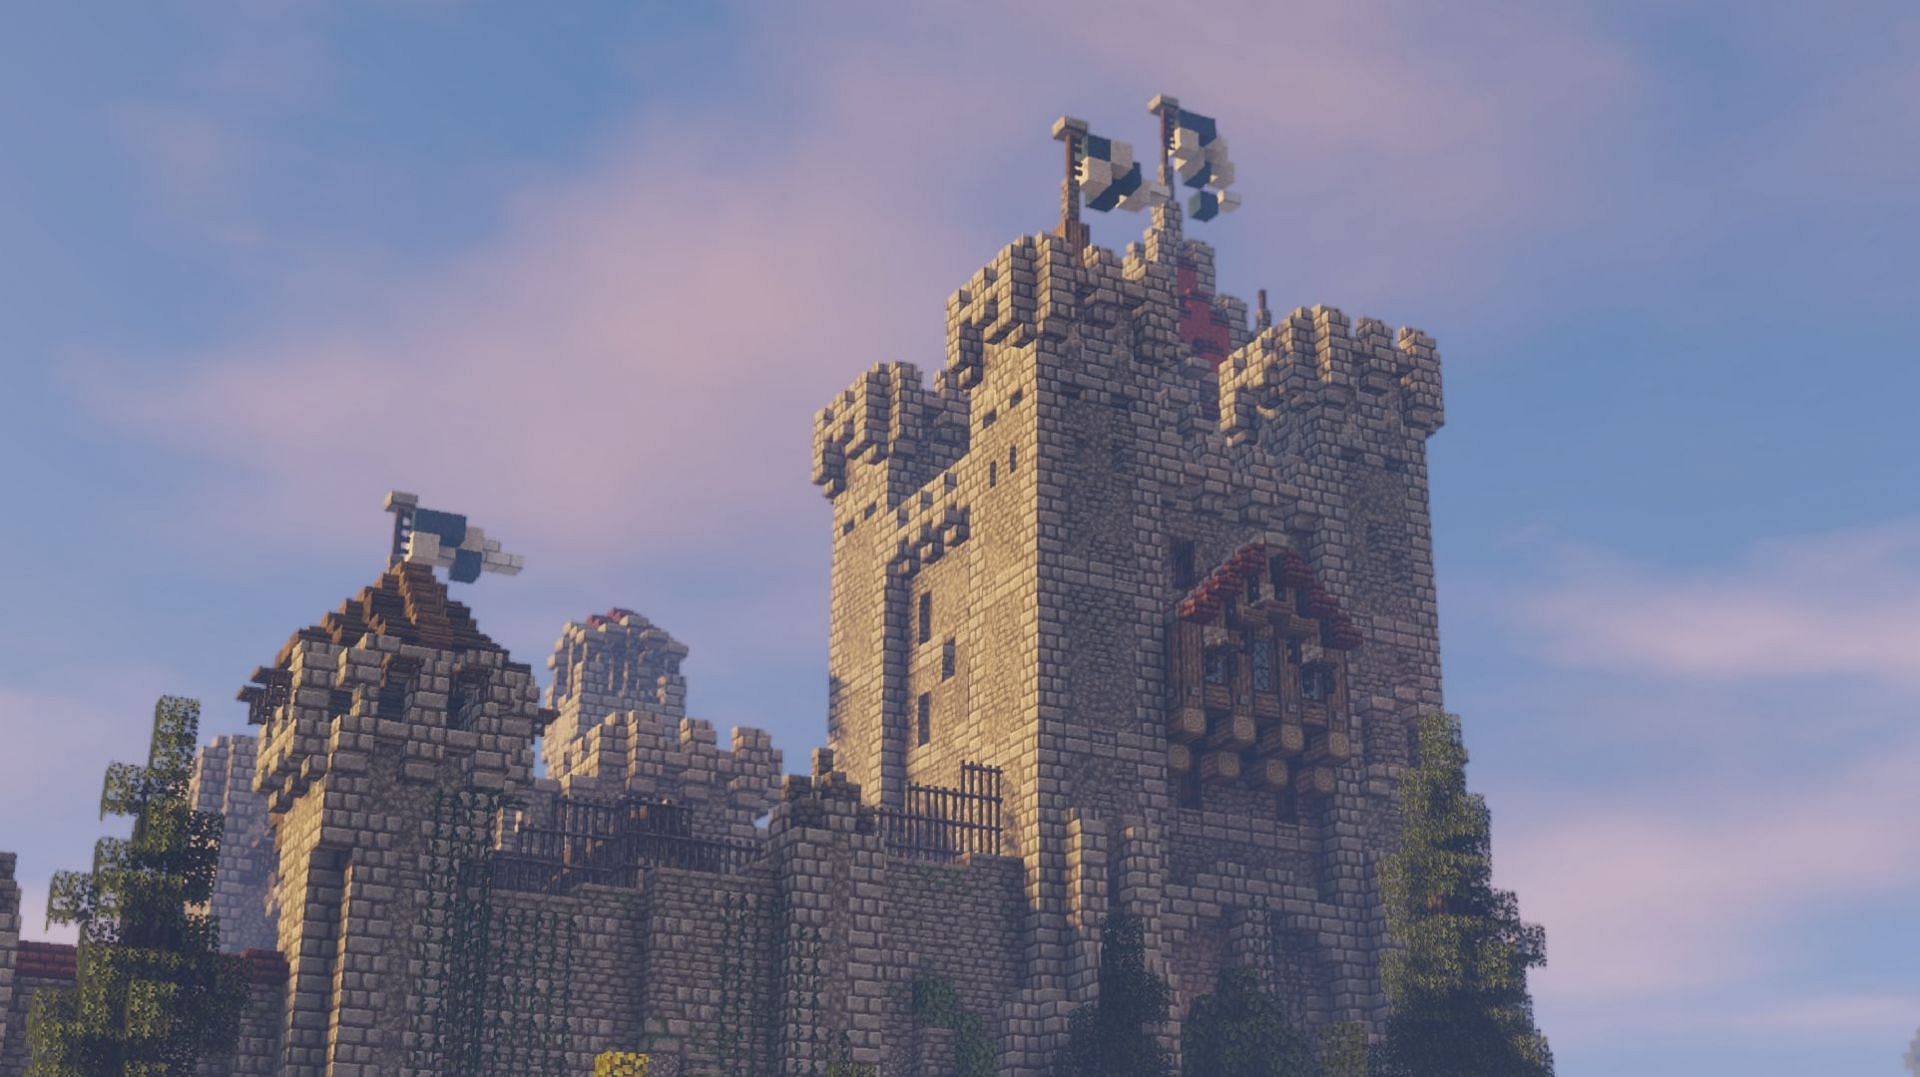 A Minecraft castle rendered within Excalibur (Image via Maffhew/CurseForge)